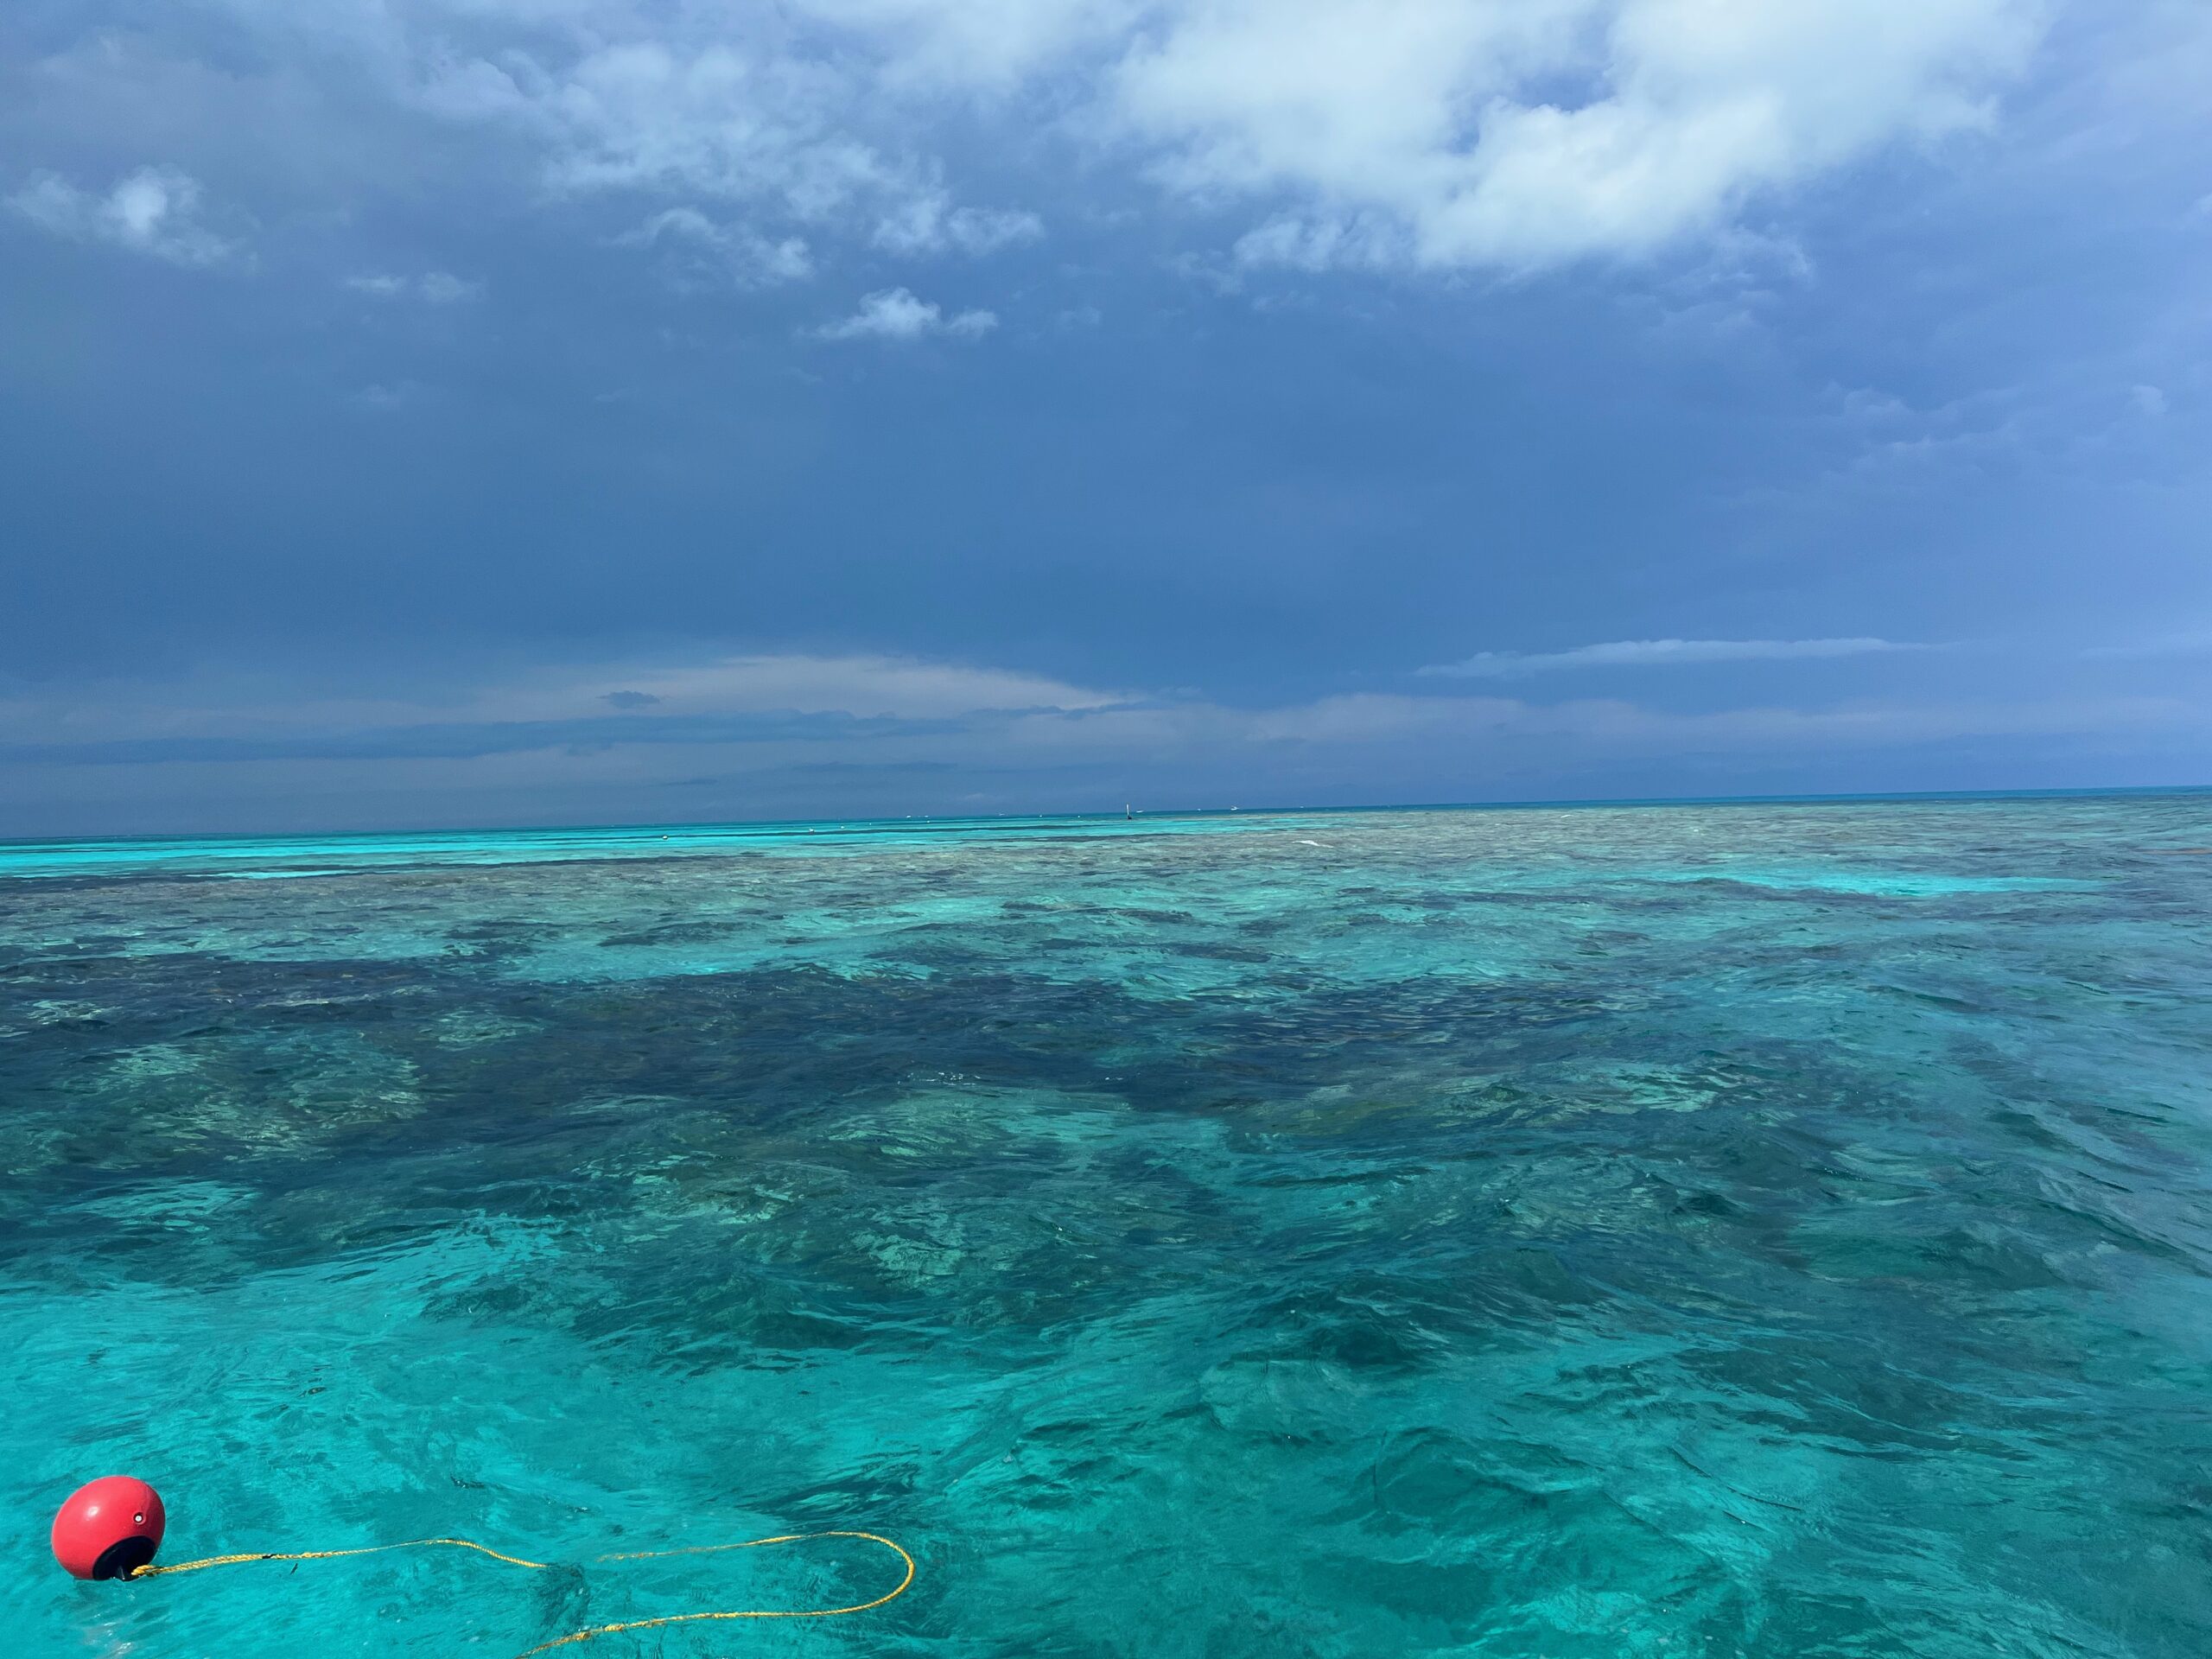 Photograph of Grecian Reef taken from the south end. The water is clear and you can see the reef post in the distance